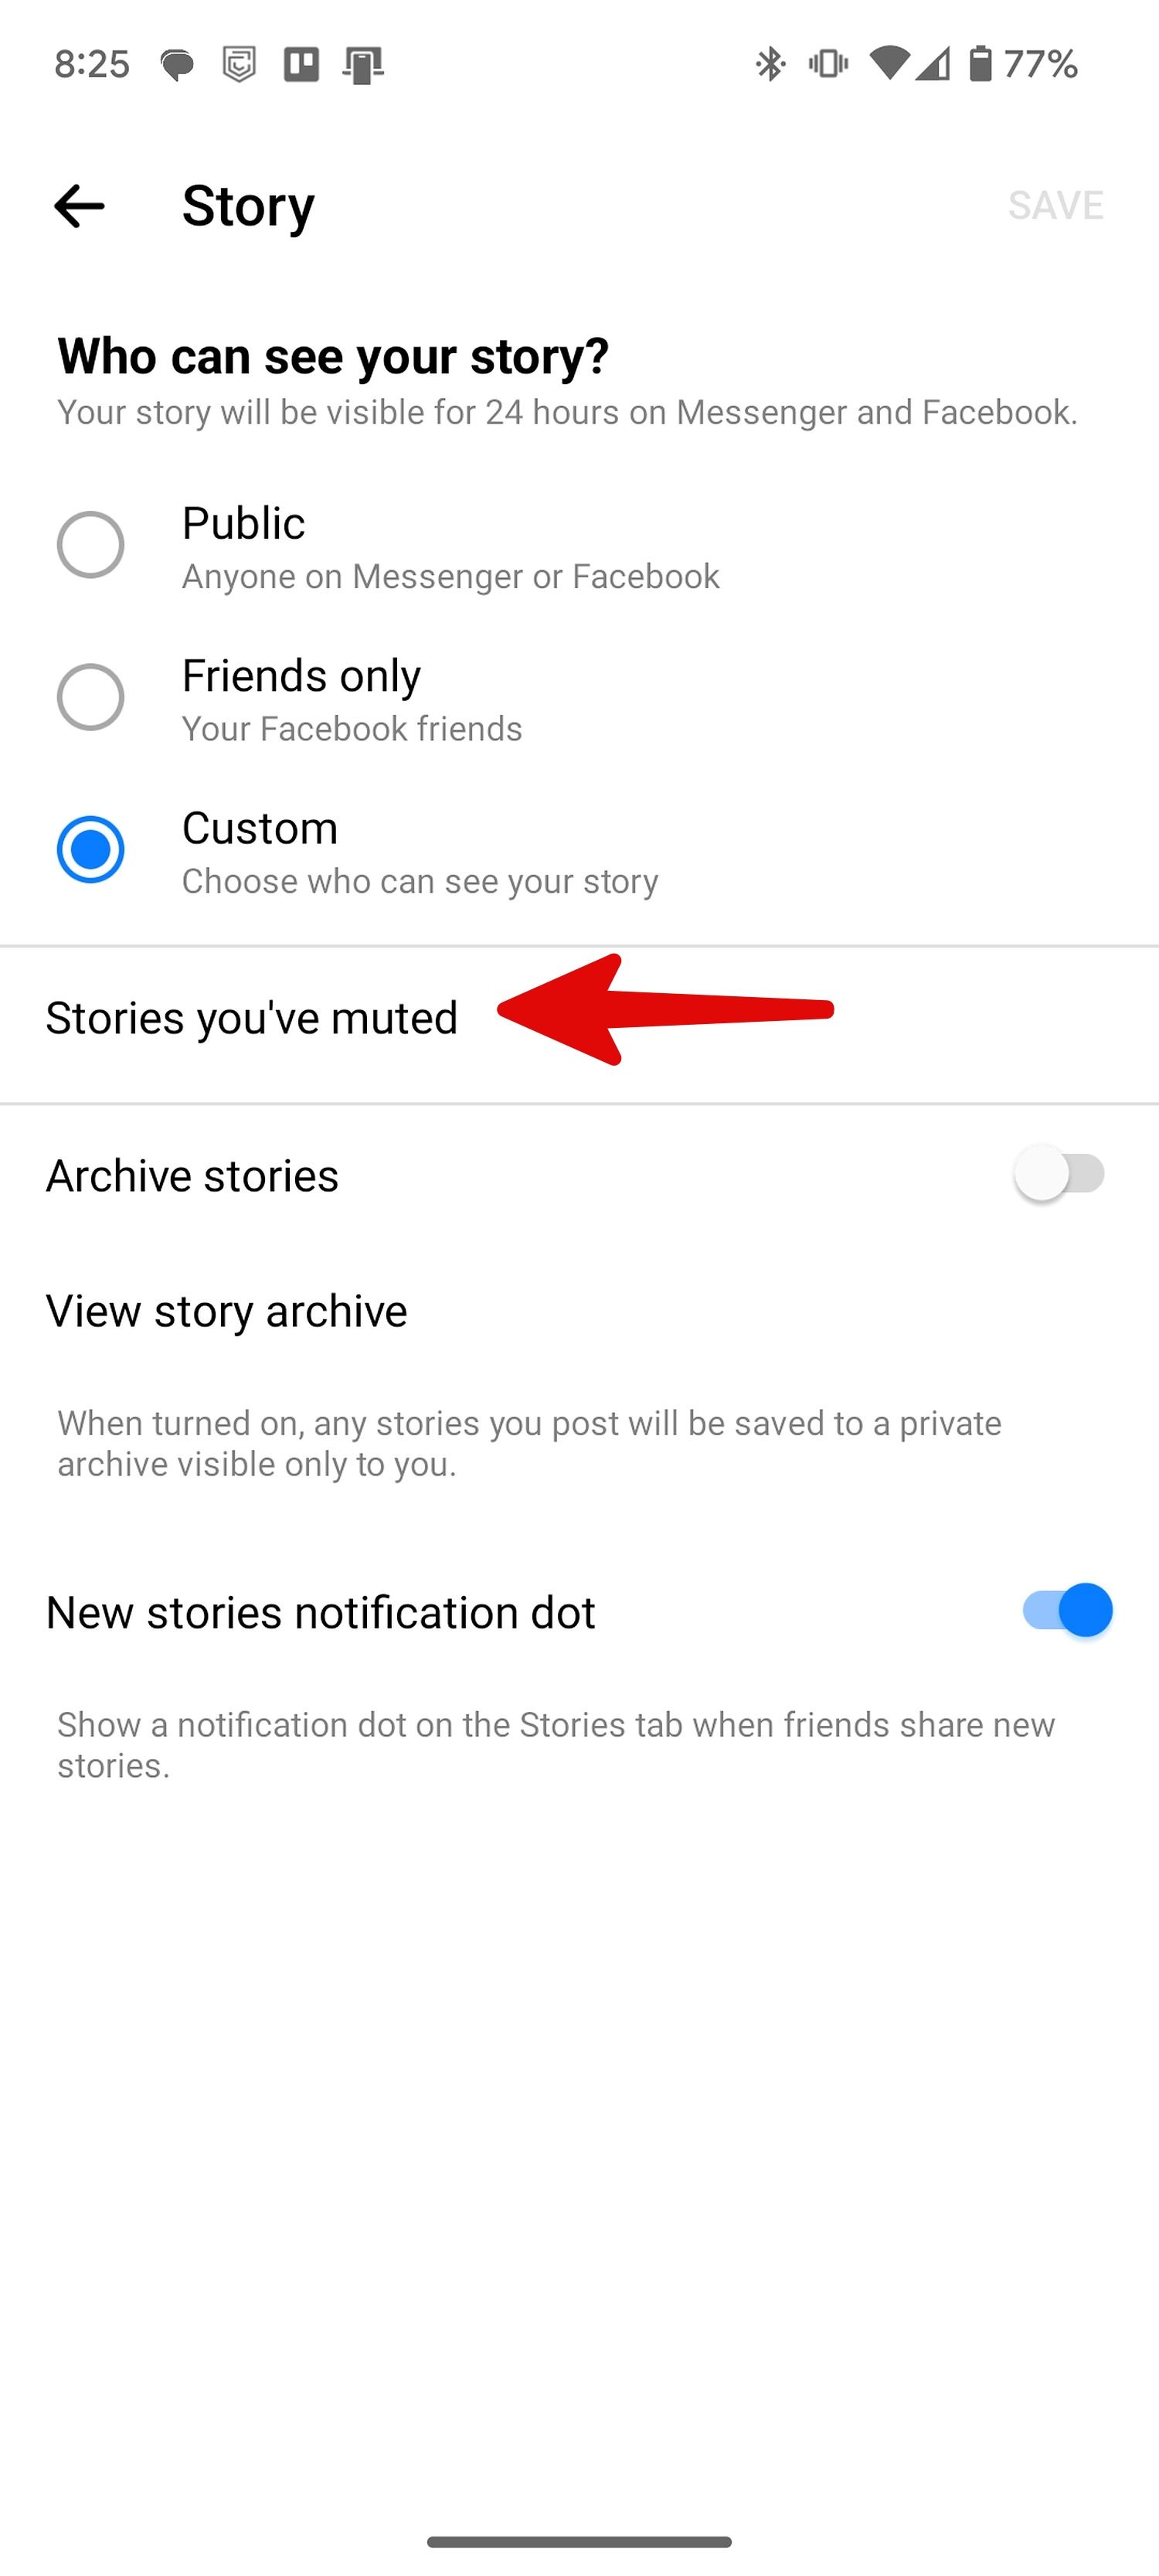 stories you have muted on Messenger